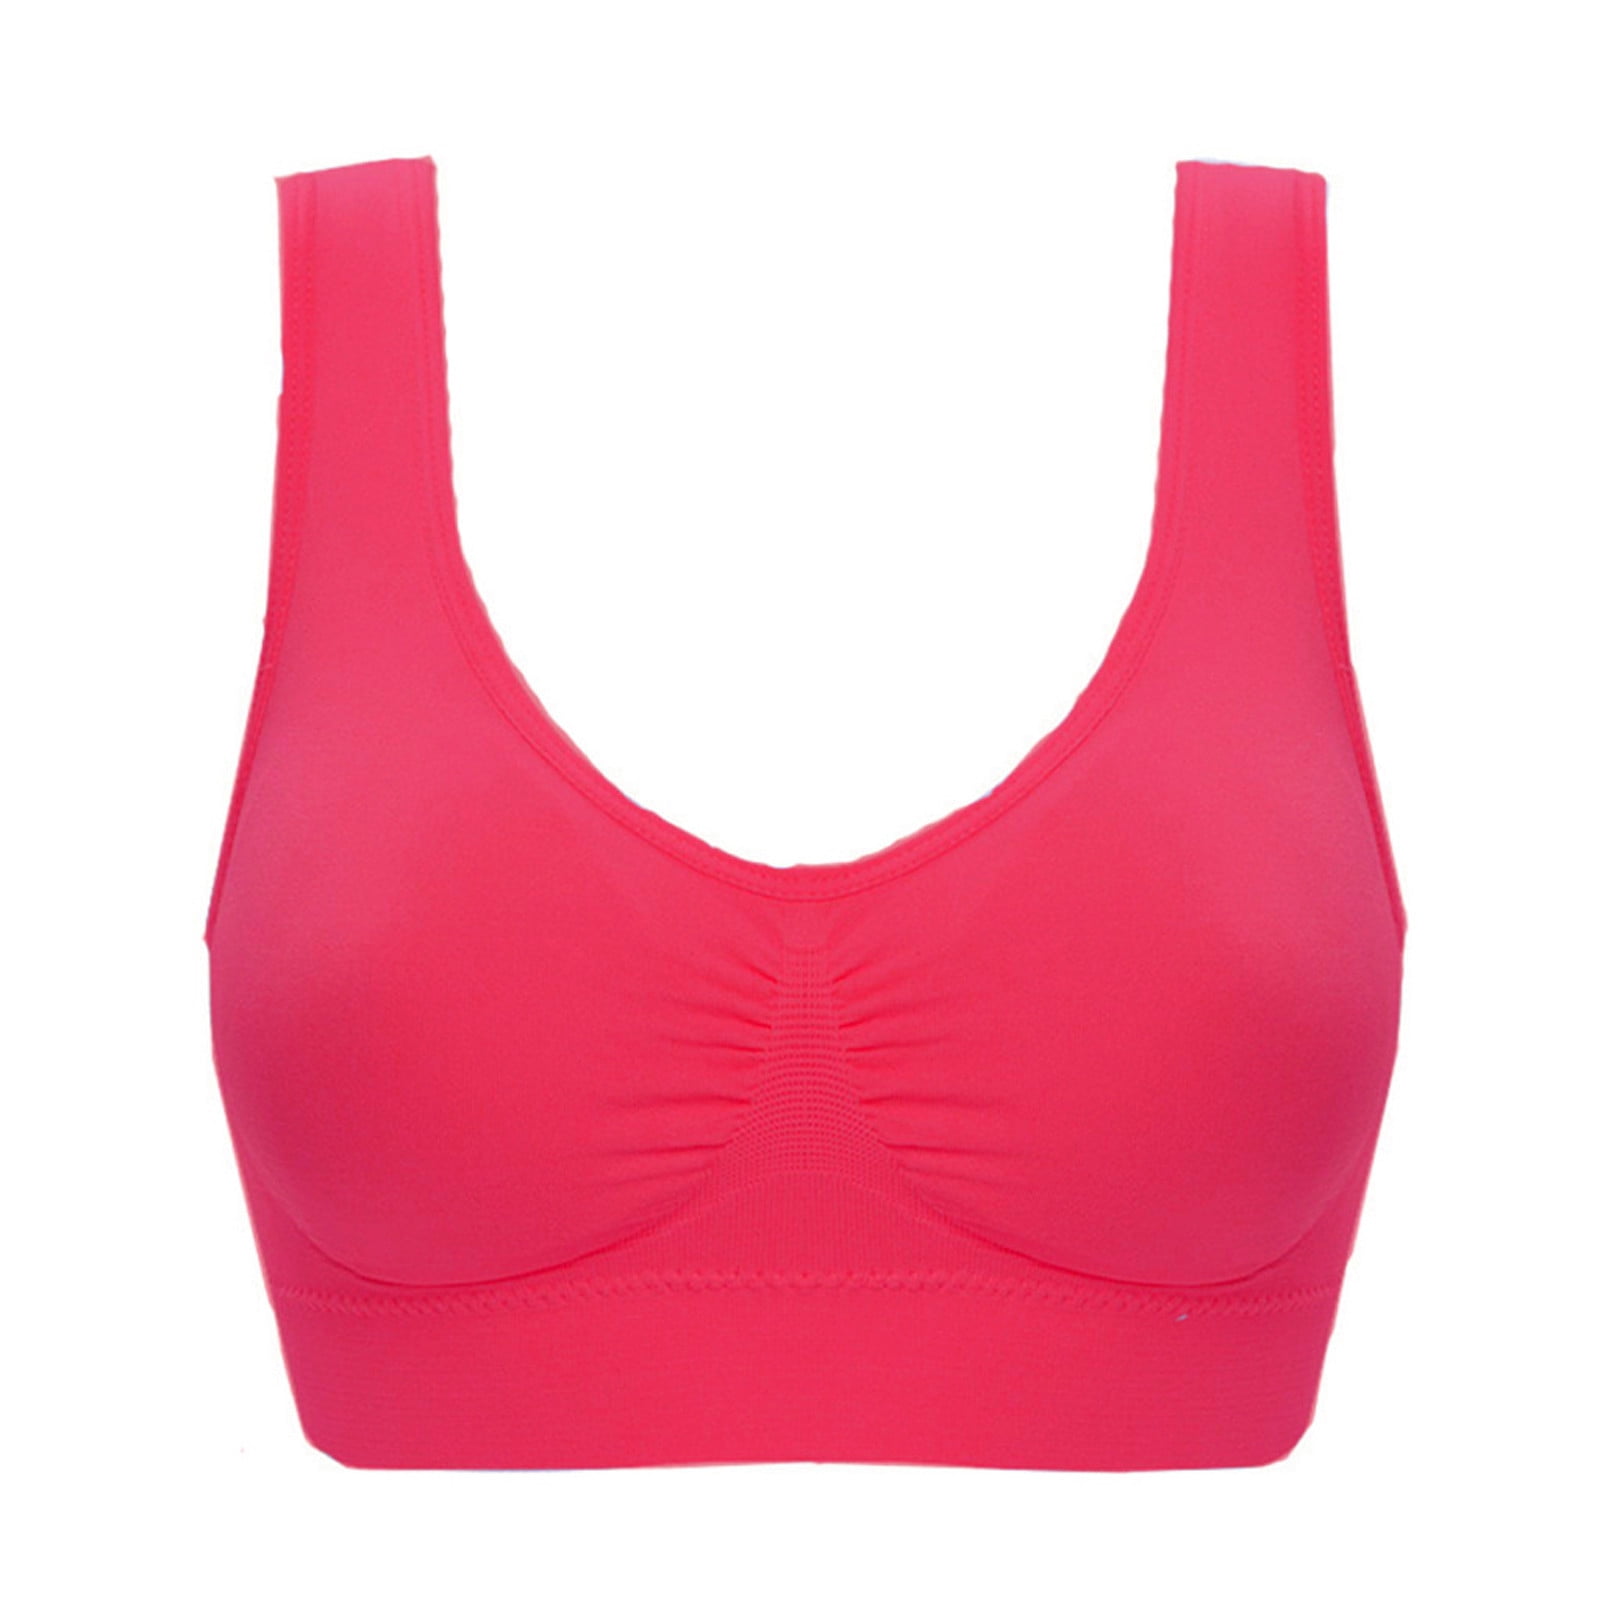 Bramtres Sports Bras Bras for Women Double Size Bandeau Plus Stretchy ...